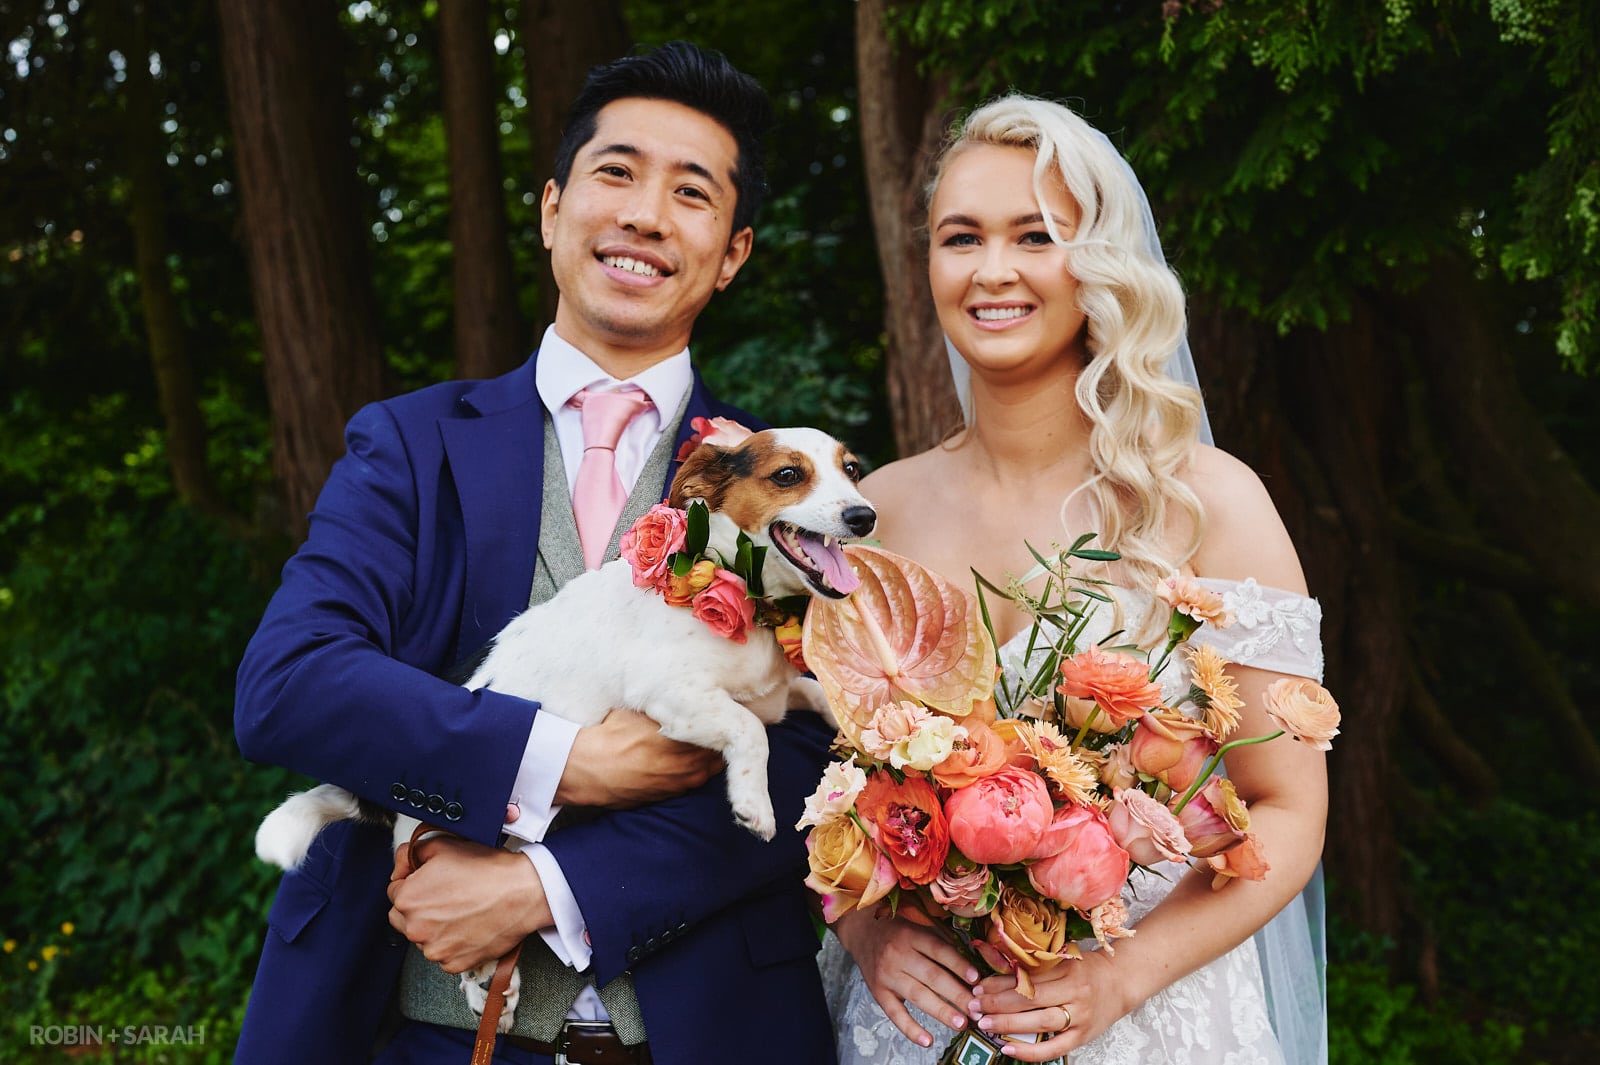 Bride and groom pose for photo with their dog